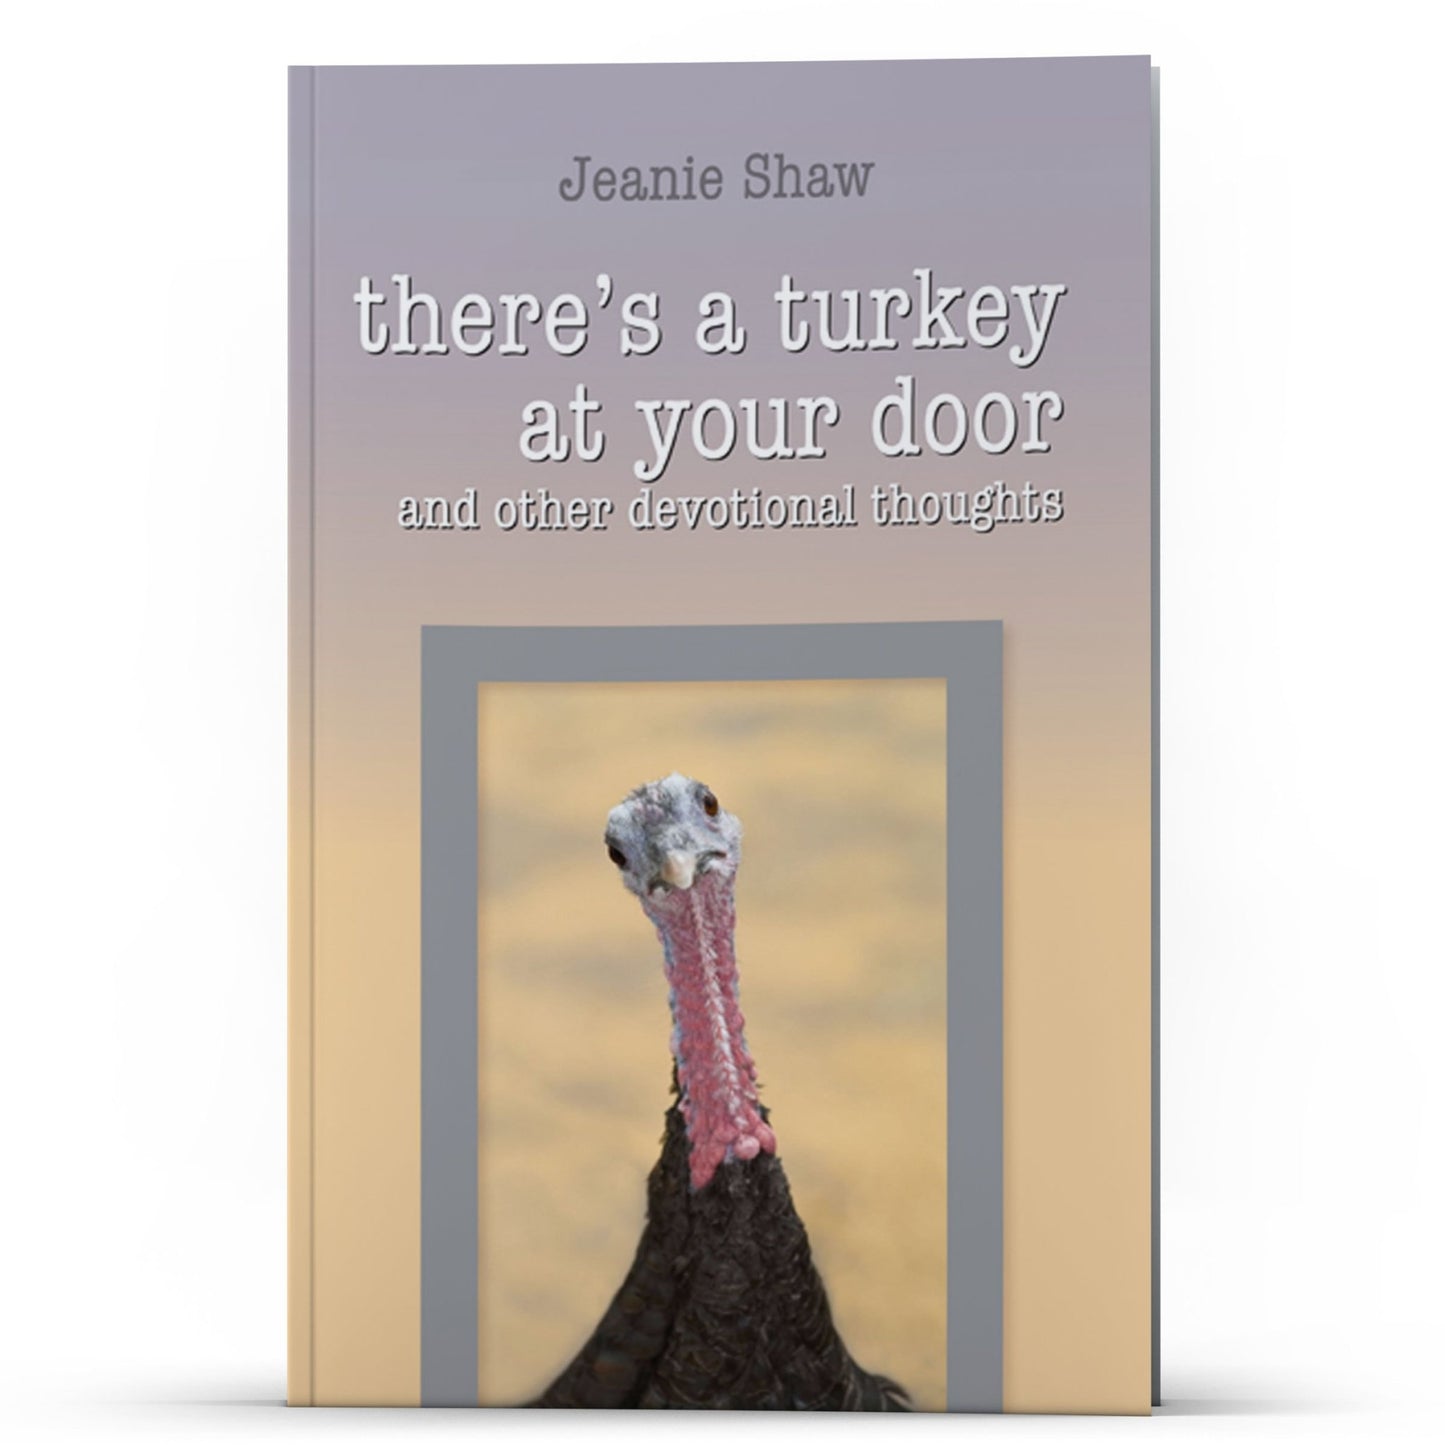 Theres a Turkey at Your Door - Illumination Publishers